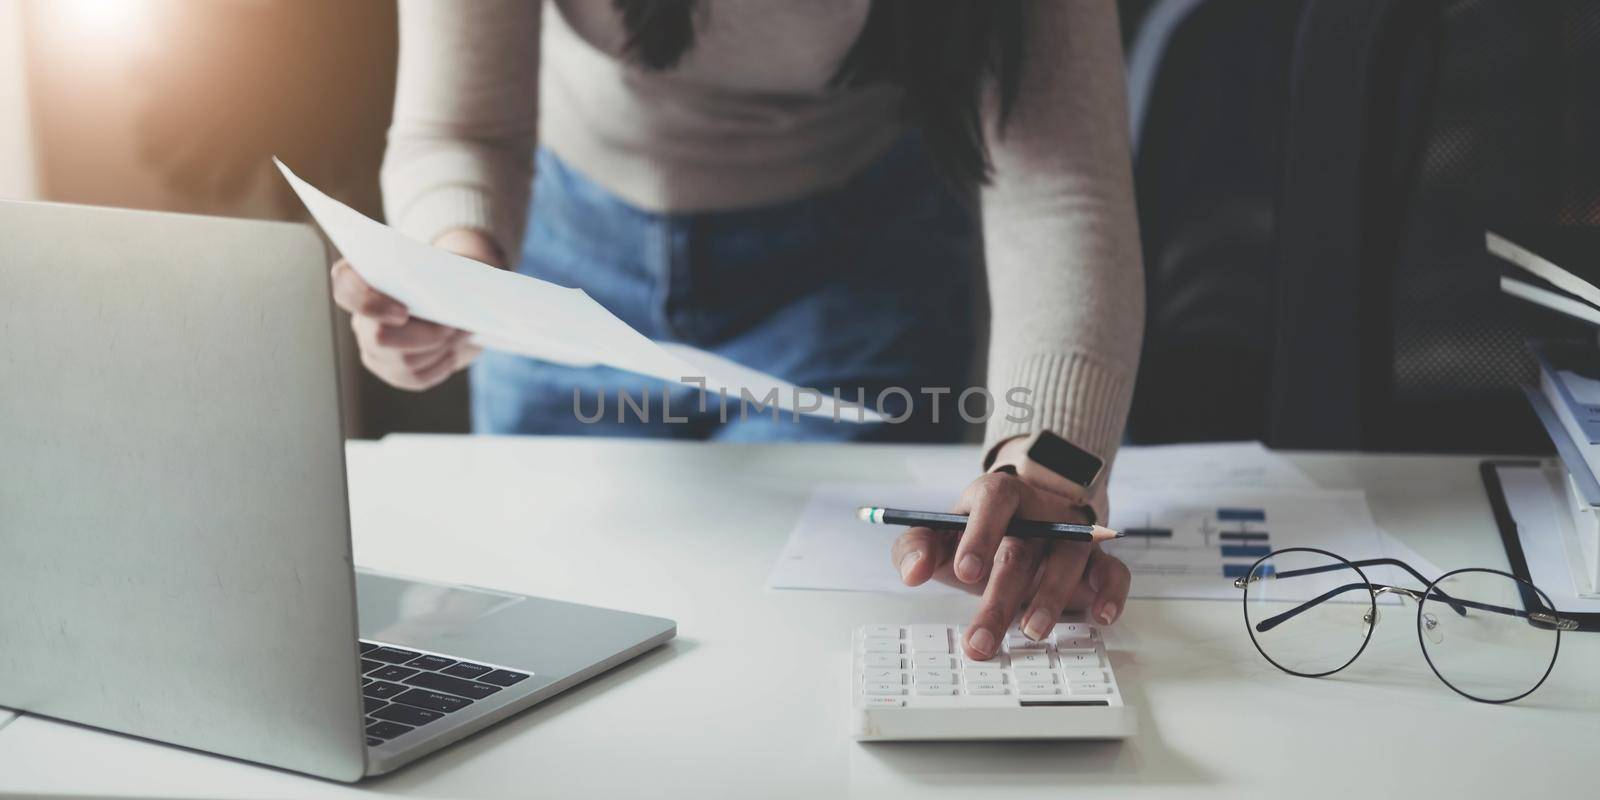 Finance Concept. Woman hold a graph pen, press a calculator and make money by writing reports, and memos, and analyzing business documents with a laptop computer vertically..